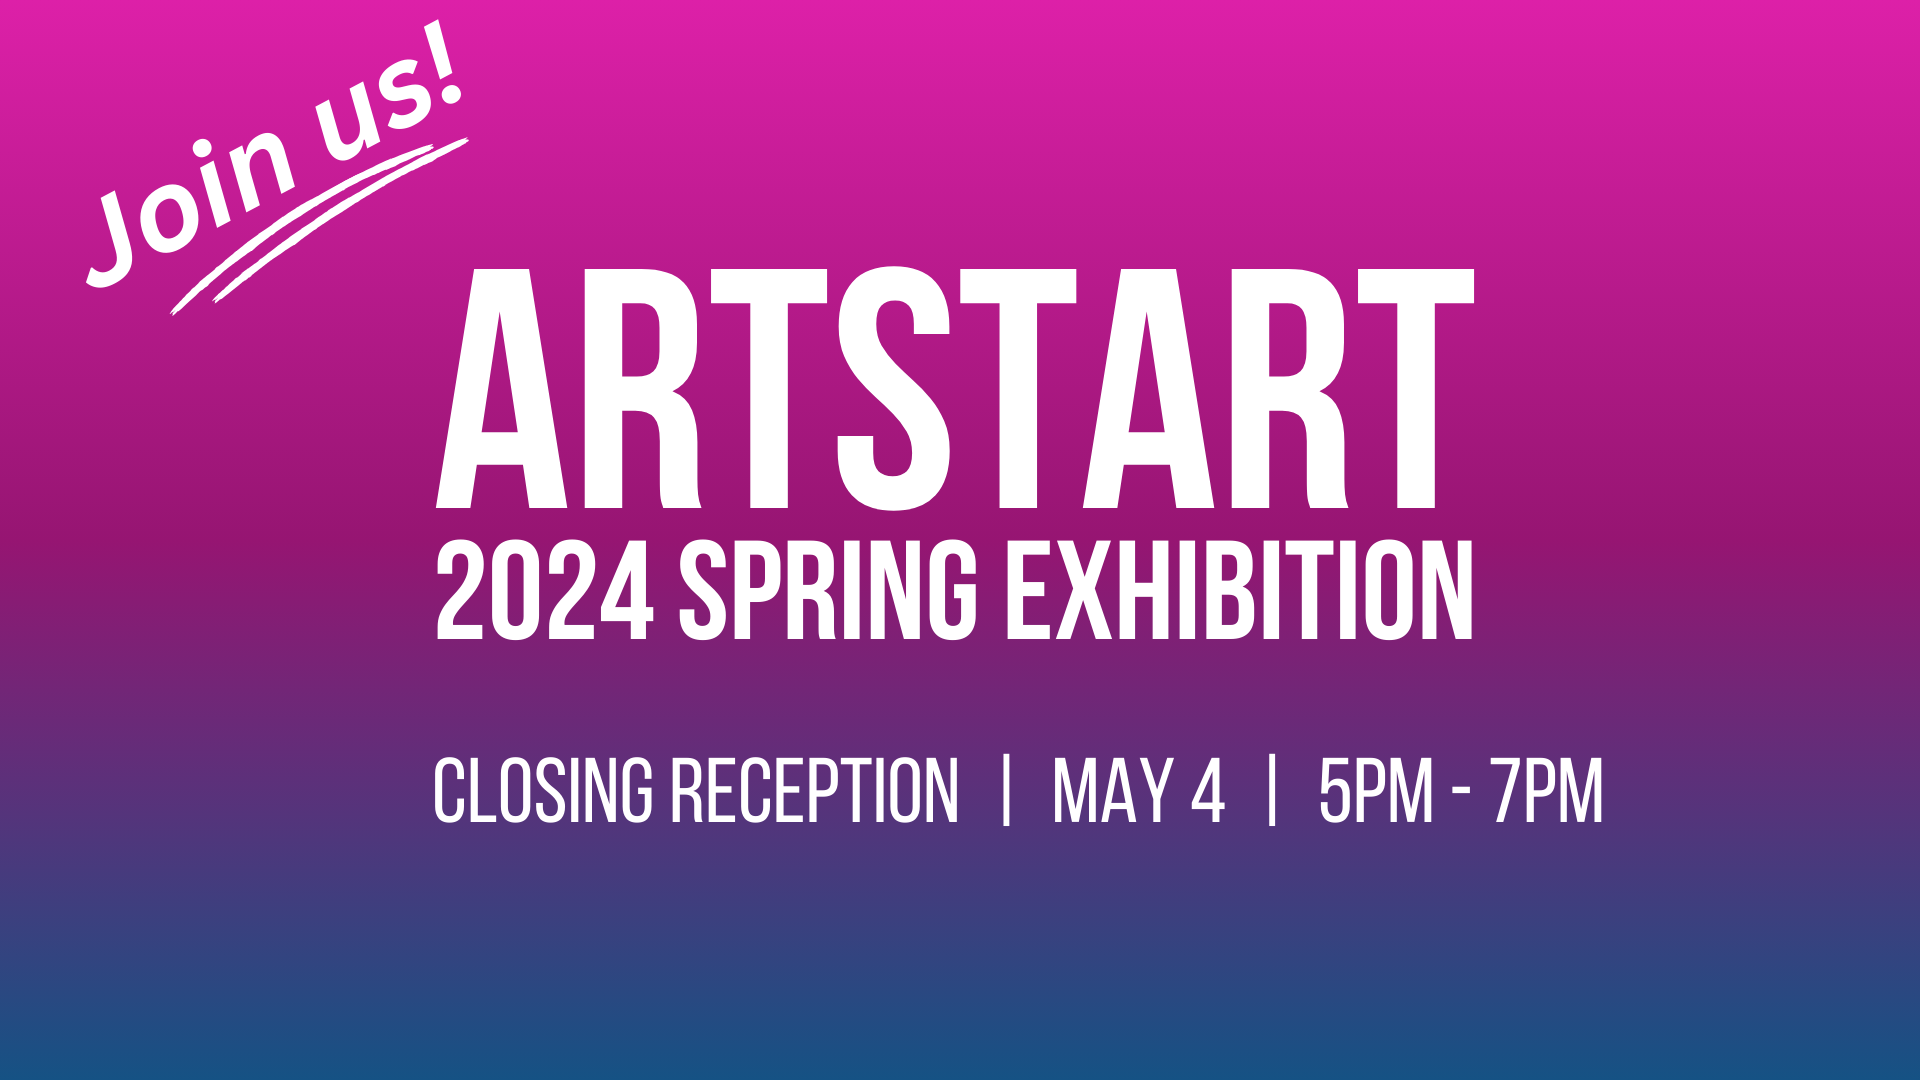 Copy of Poster 2024 Spring Exhibition (11 x 8.5 in) (1920 x 1080 px) (1)